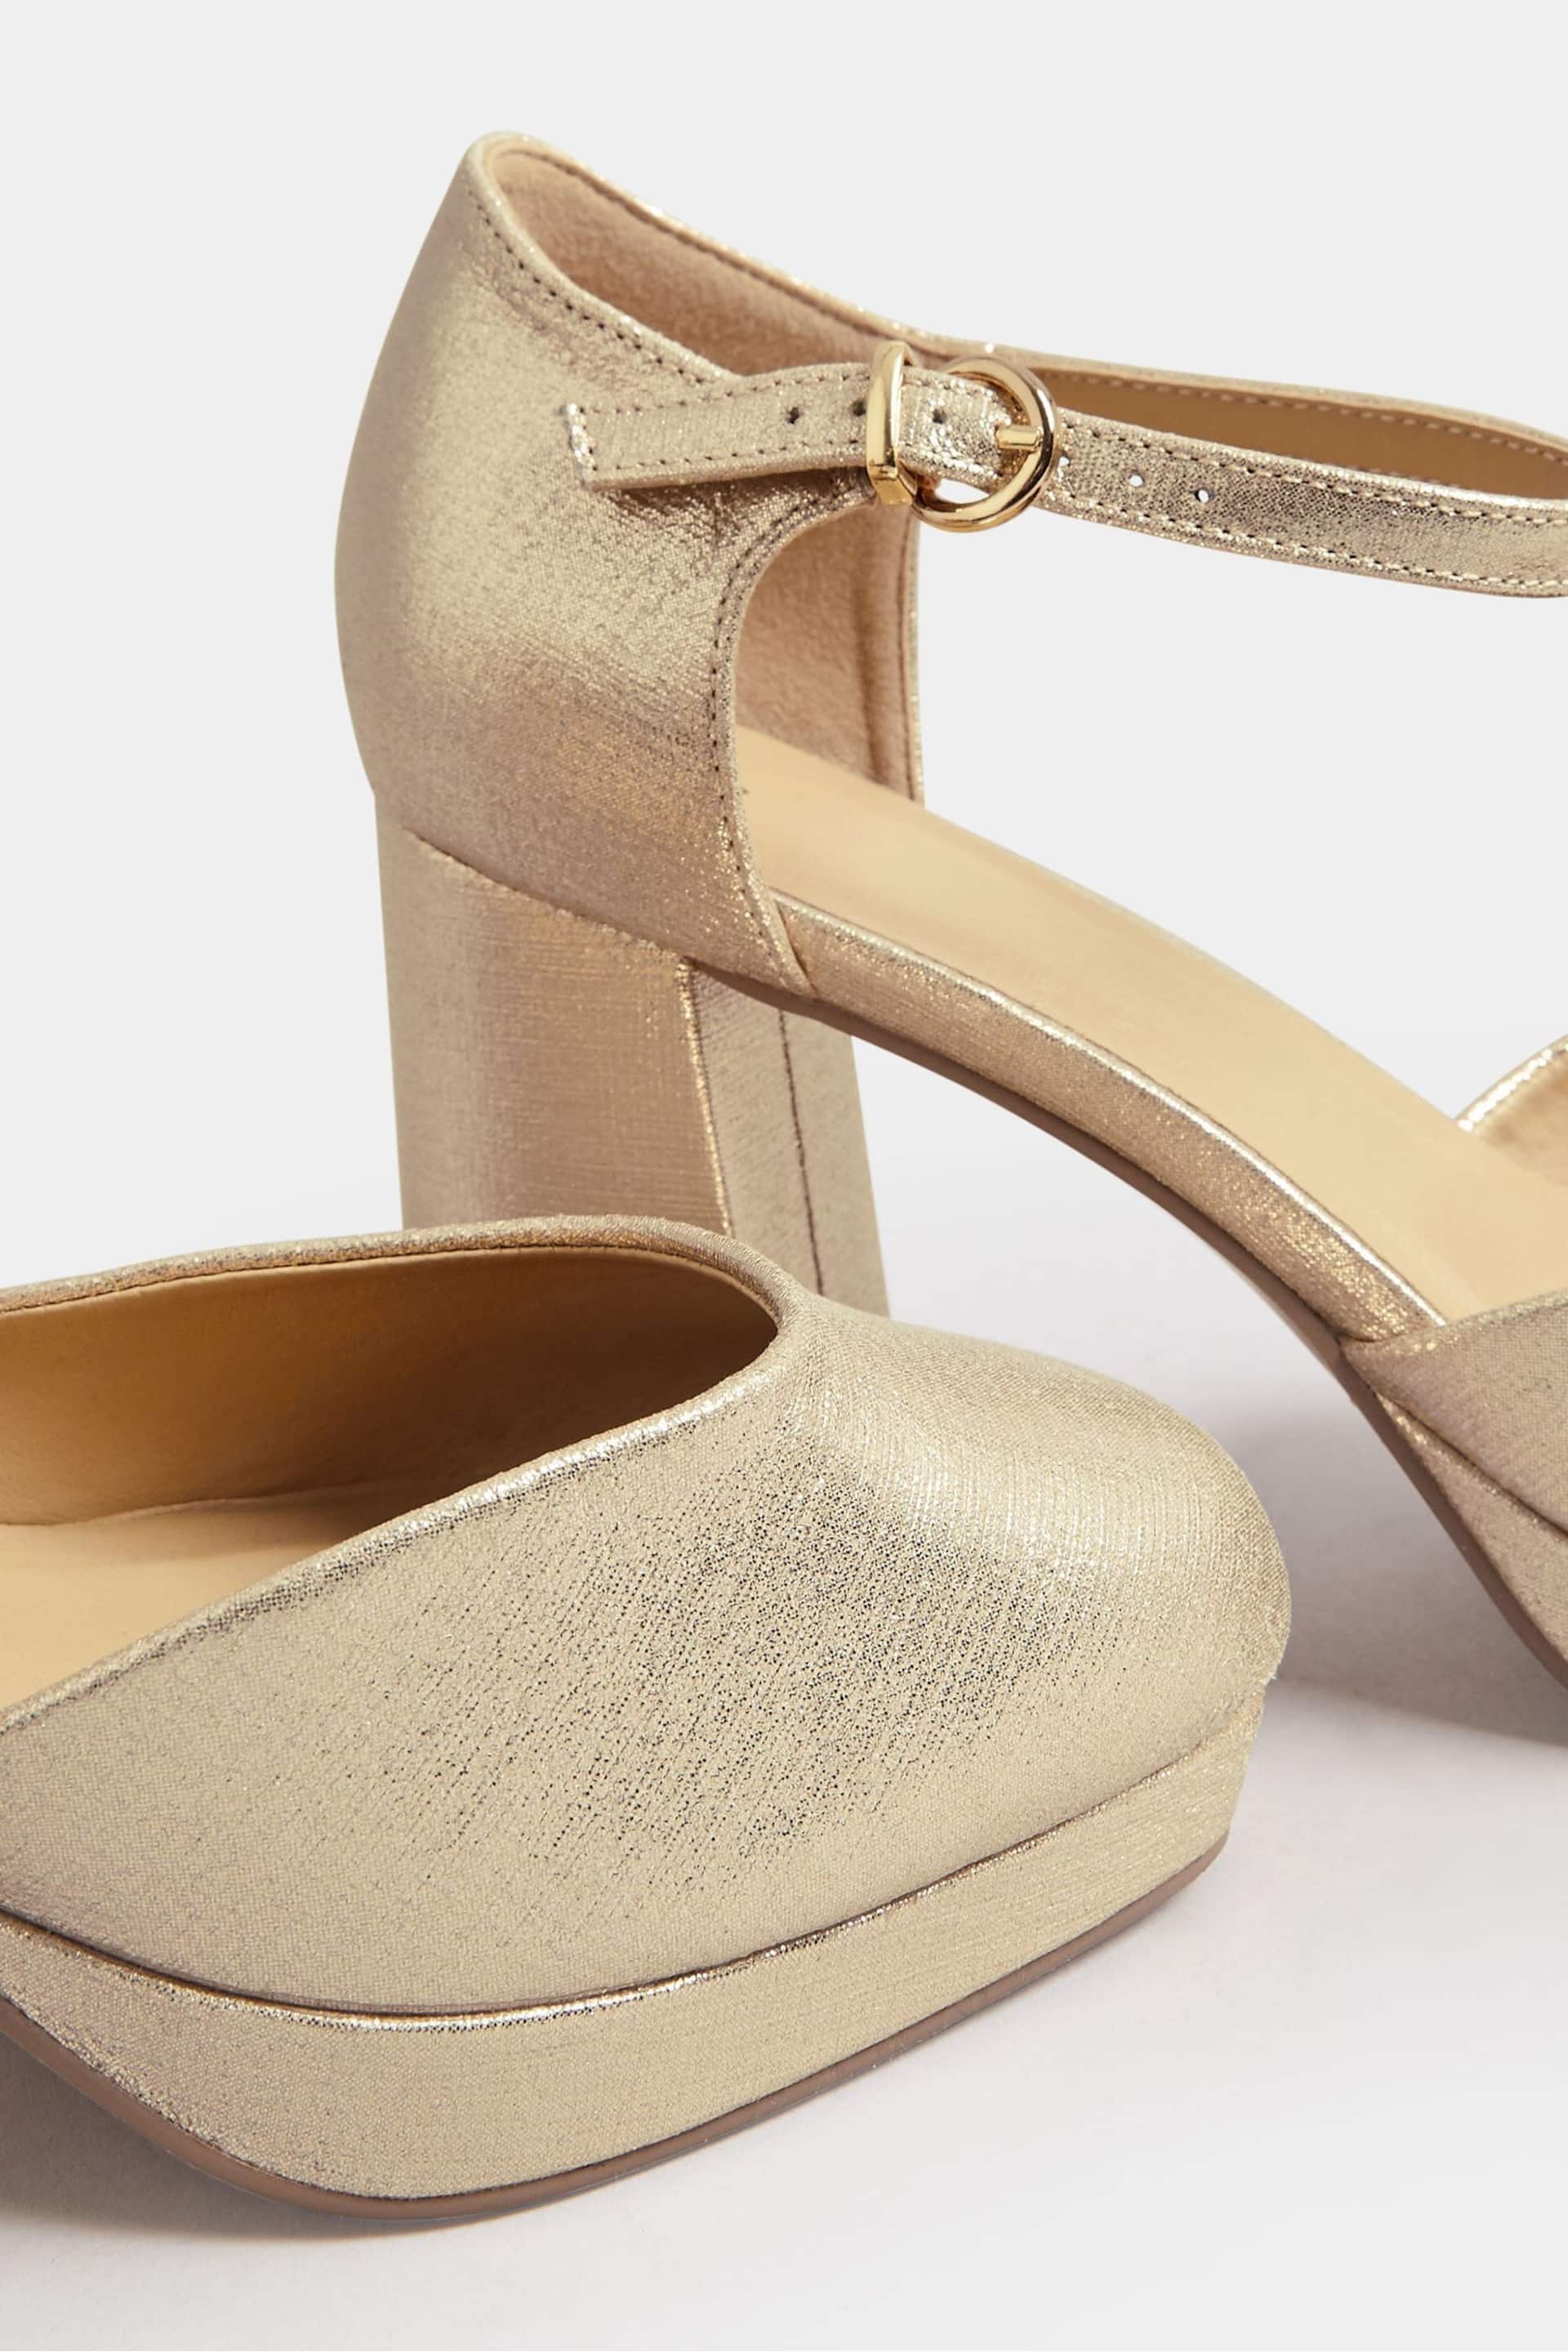 Yours Curve Gold Extra-Wide Fit Platform Court Shoes - Image 4 of 4